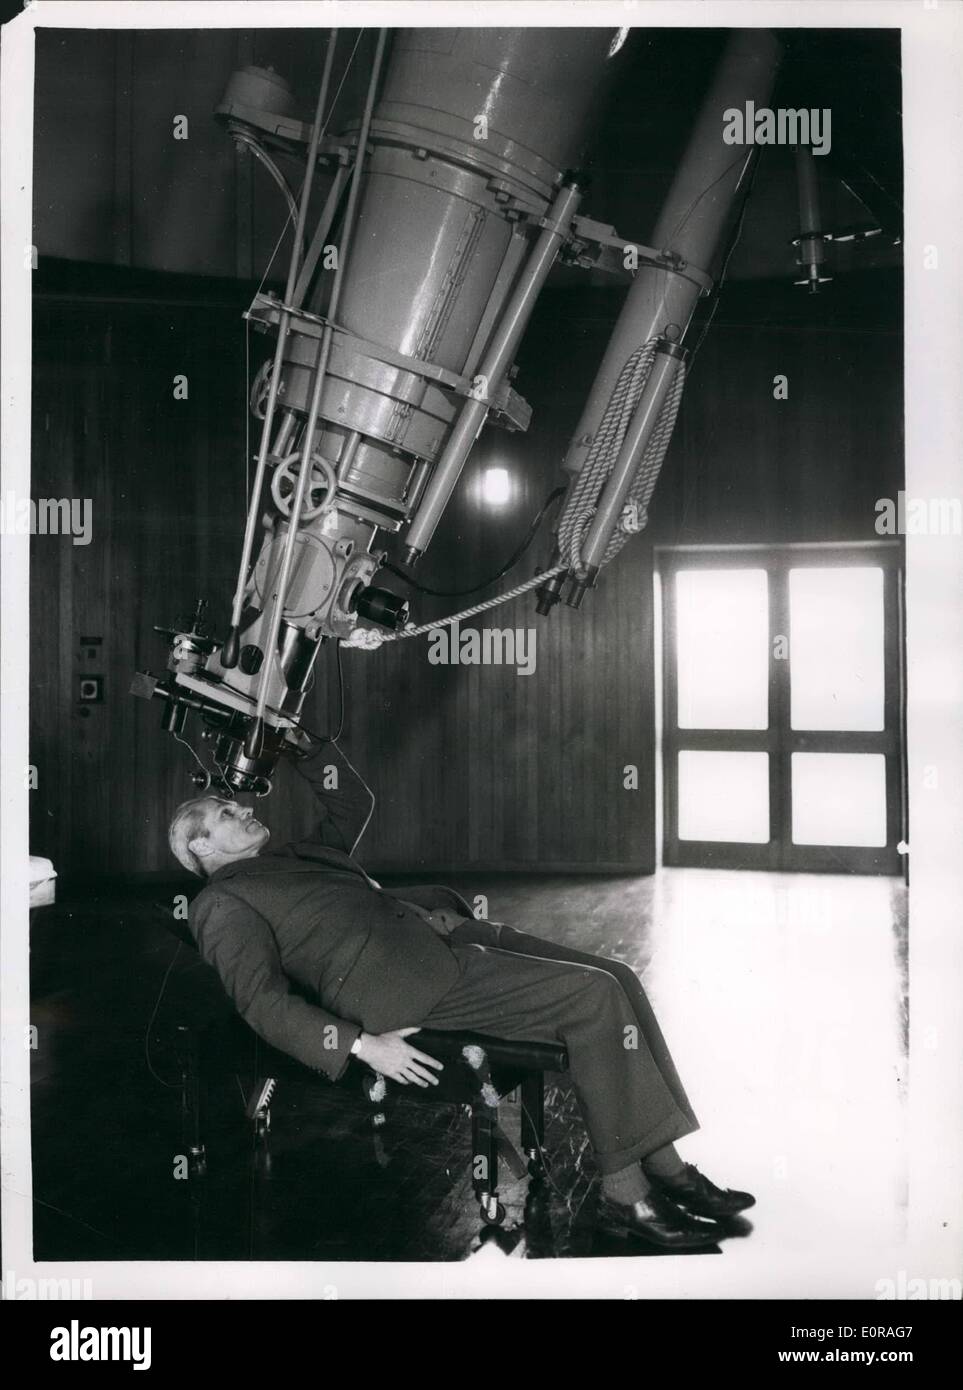 Nov. 11, 1958 - The New Royal Greenwich observatory Herstwonceaux castle Sussex; Giant telescope which mere mounted at Greenwich have been re erected at ''Dome Town'' Harstmoncenux Castle, Sussex. The move has been going for years - and in now complete. The famous castle is used for administrative offices - laba and library. The telescopes at housed in the specially constructed domes built in the castle grounds. Photo Shows Dr Stock Photo